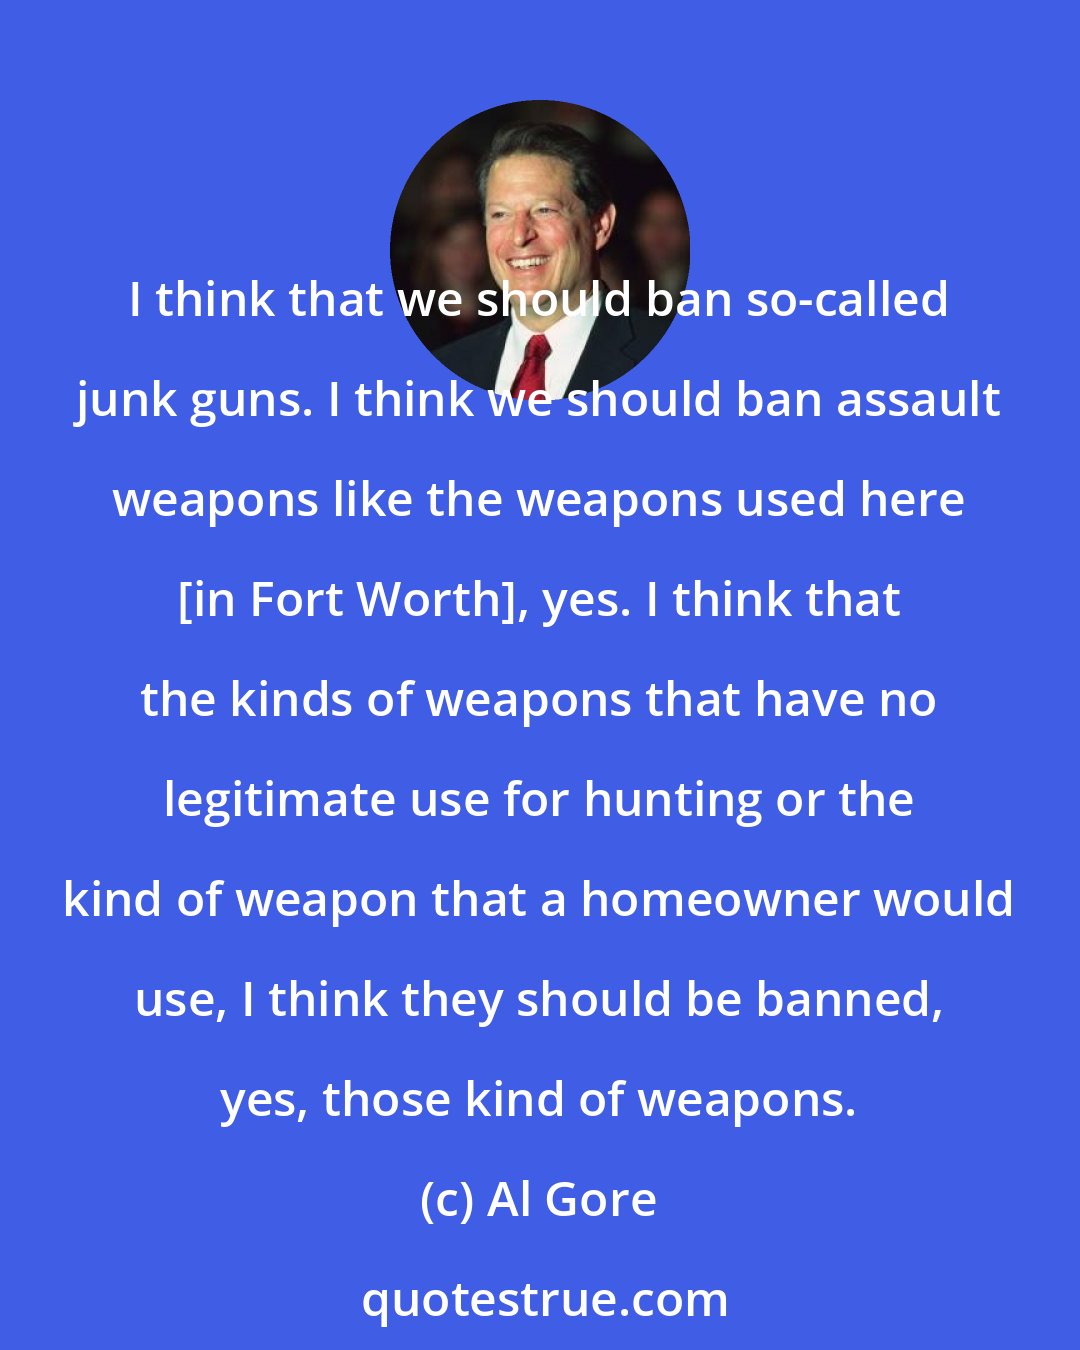 Al Gore: I think that we should ban so-called junk guns. I think we should ban assault weapons like the weapons used here [in Fort Worth], yes. I think that the kinds of weapons that have no legitimate use for hunting or the kind of weapon that a homeowner would use, I think they should be banned, yes, those kind of weapons.